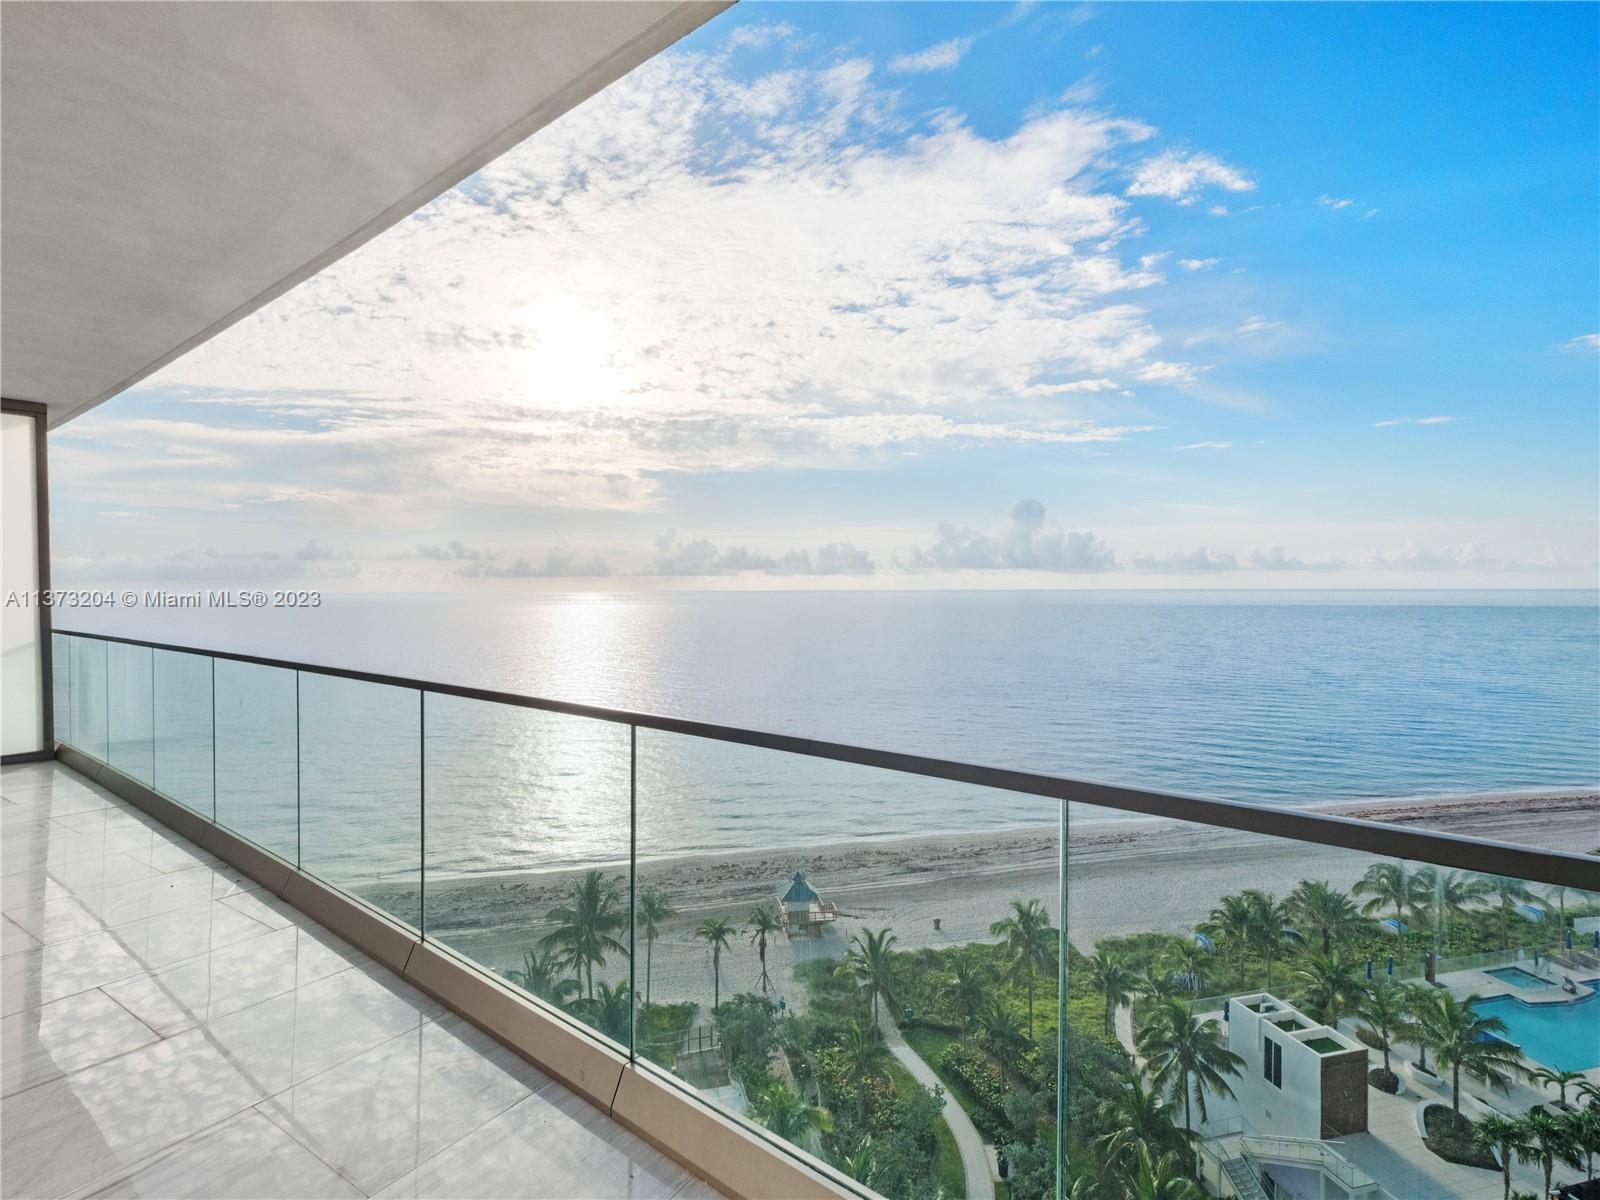 18975 Collins Ave 1004, Sunny Isles Beach, Florida 33160, 2 Bedrooms Bedrooms, ,2 BathroomsBathrooms,Residential,For Sale,18975 Collins Ave 1004,A11373204